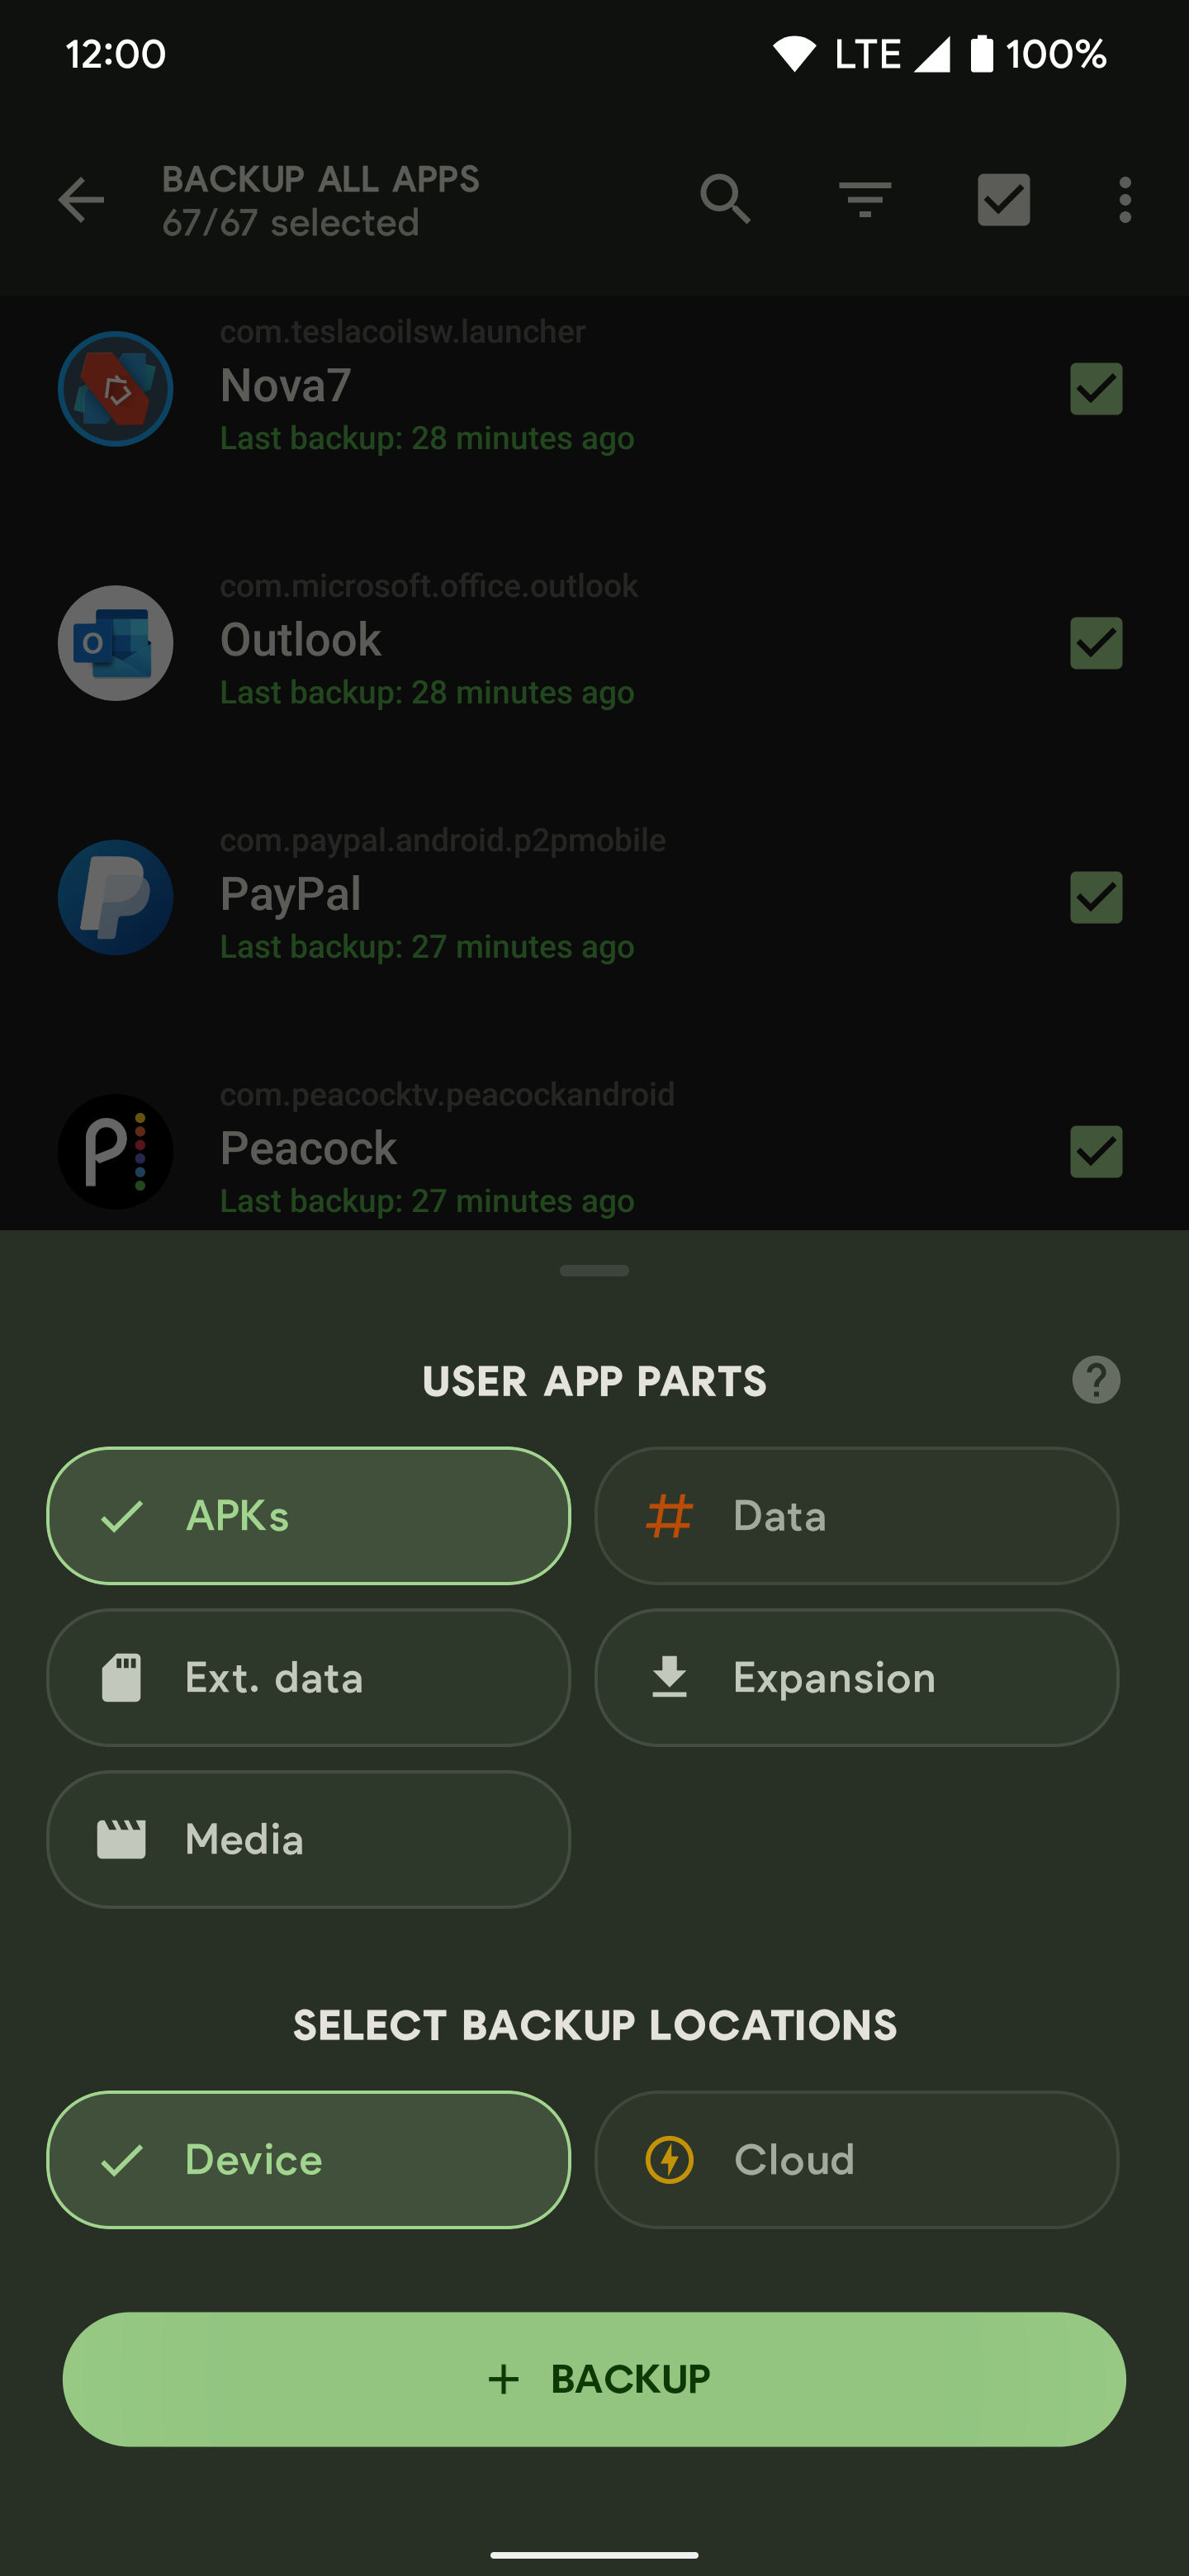 The user app settings when backing up apps in the Swift Backup app